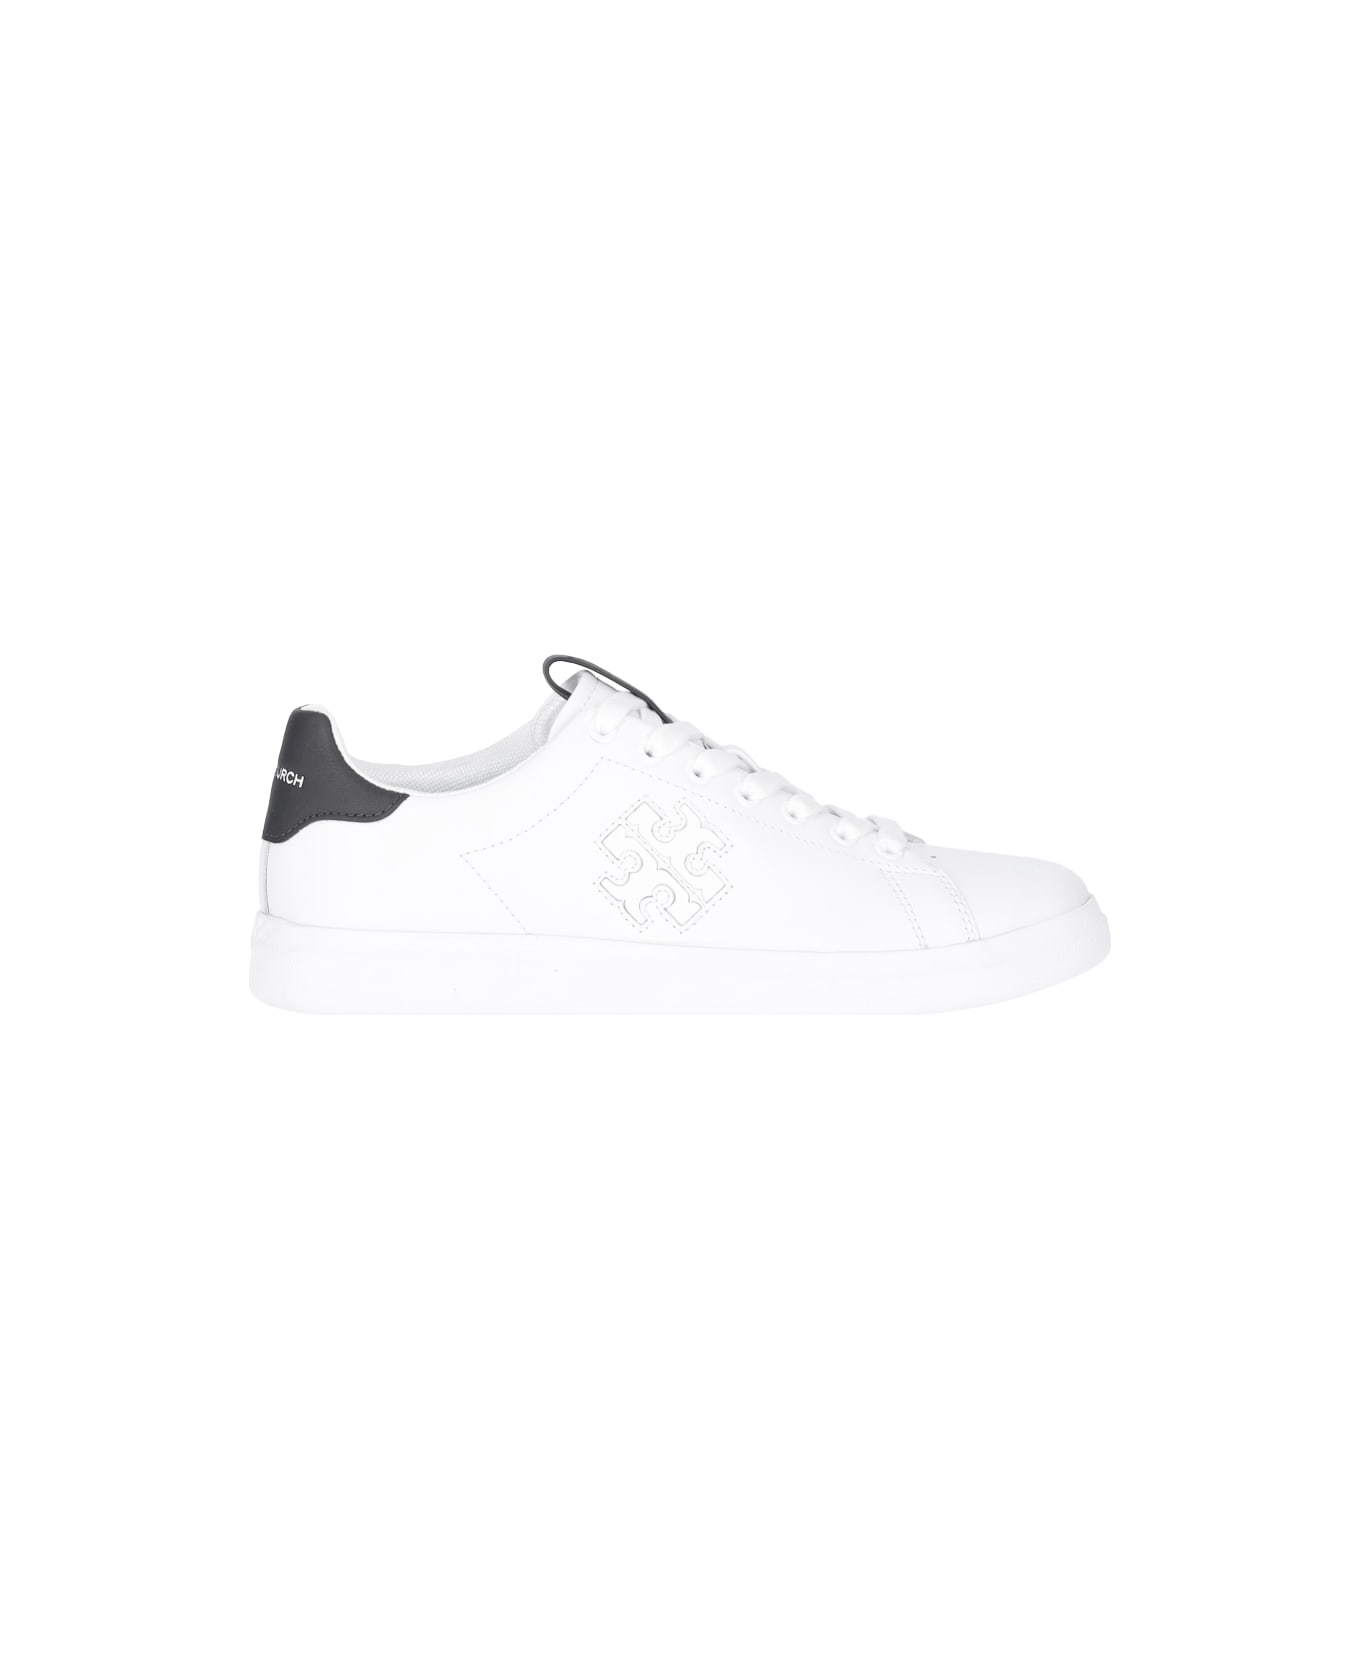 Tory Burch "howell" Sneakers - White